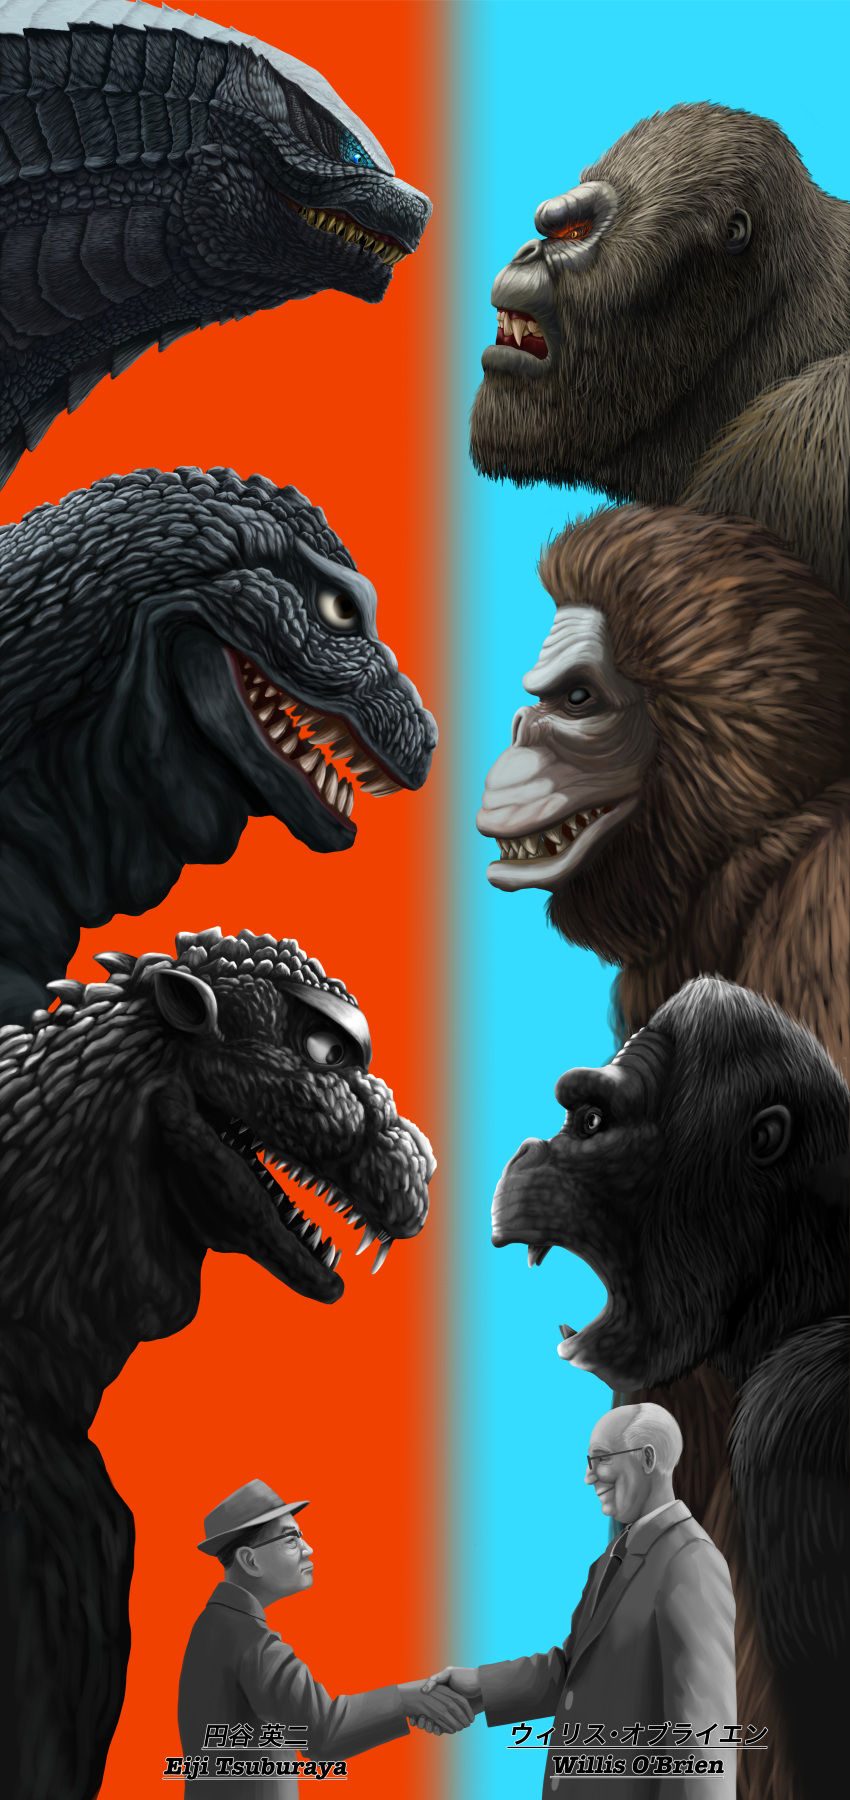 2boys absurdres animal ape character_request copyright_request crossover dinosaur e_senior_0826 eiji_tsuburaya fangs giant giant_monster glowing godzilla godzilla:_king_of_the_monsters godzilla_(monsterverse) godzilla_(series) godzilla_vs._kong godzilla_vs_king_kong gorilla handshake highres jaw kaijuu king_kong king_kong_(series) kong:_skull_island kong_(monsterverse) monster monsterverse multiple_boys open_mouth oversized_animal real_life rivals scales sharp_teeth spines standing tail teeth tokusatsu willis_o'brien yellow_eyes